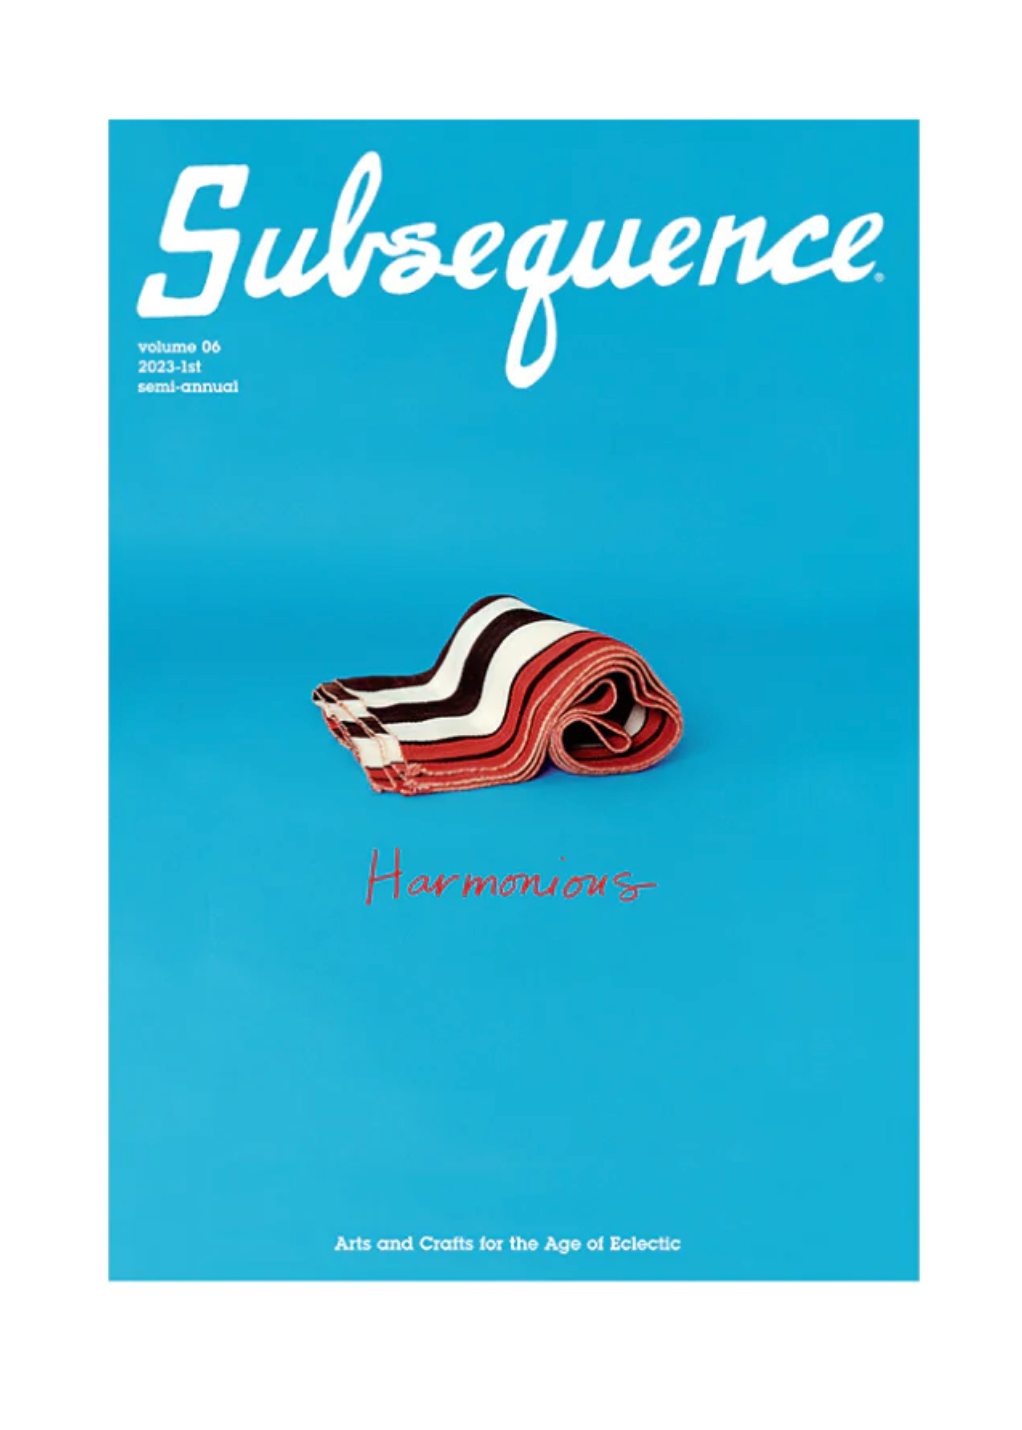 Subsequence Magazine Volume 06